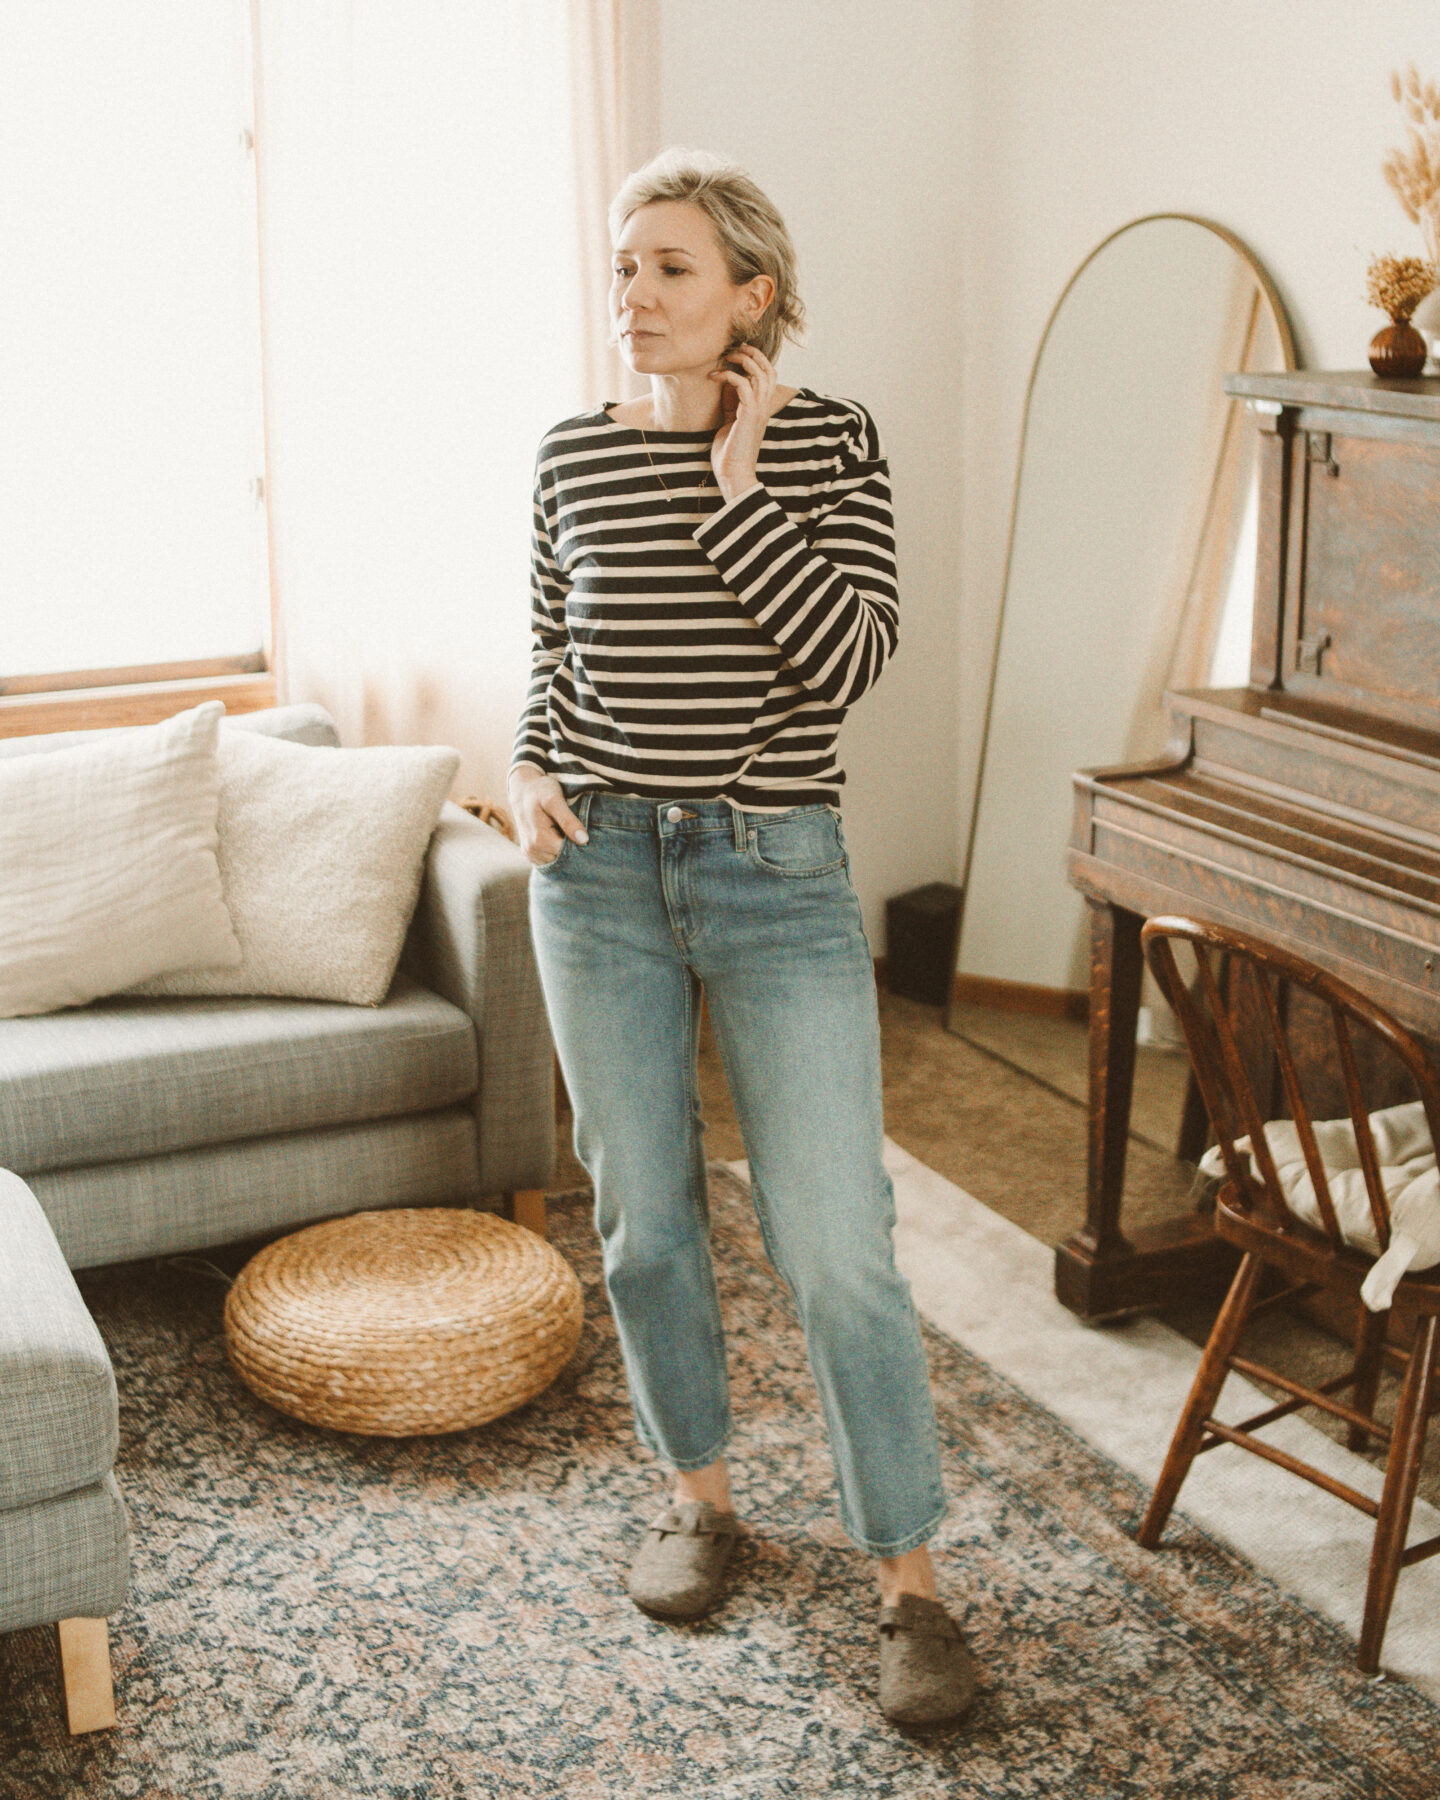 Karin Emily wears and reviews Everlane low waist jeans